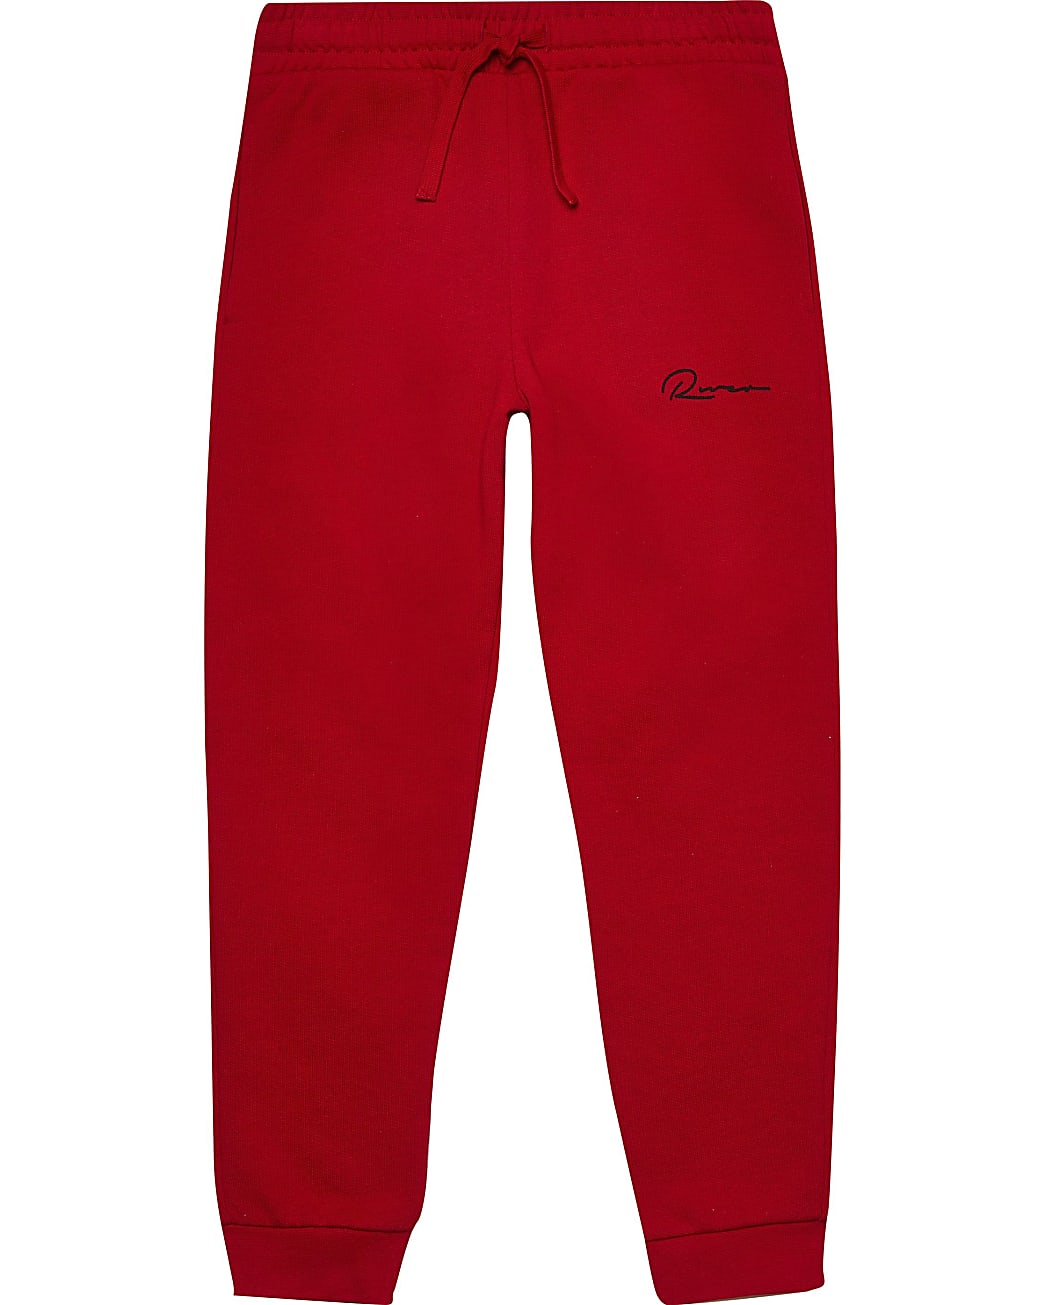 Age 13+ boys red 'River' joggers